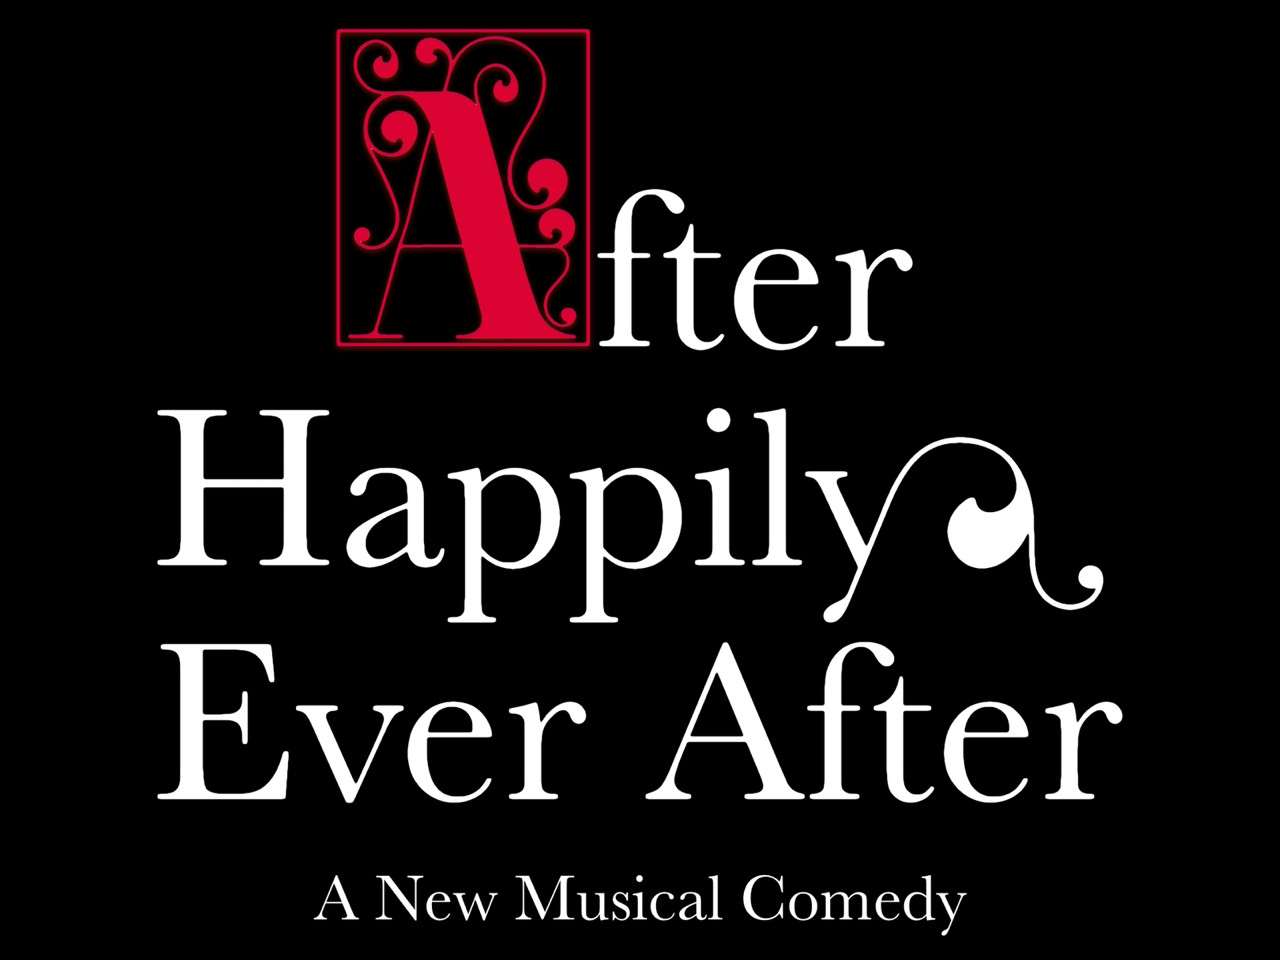 After Happily Ever After